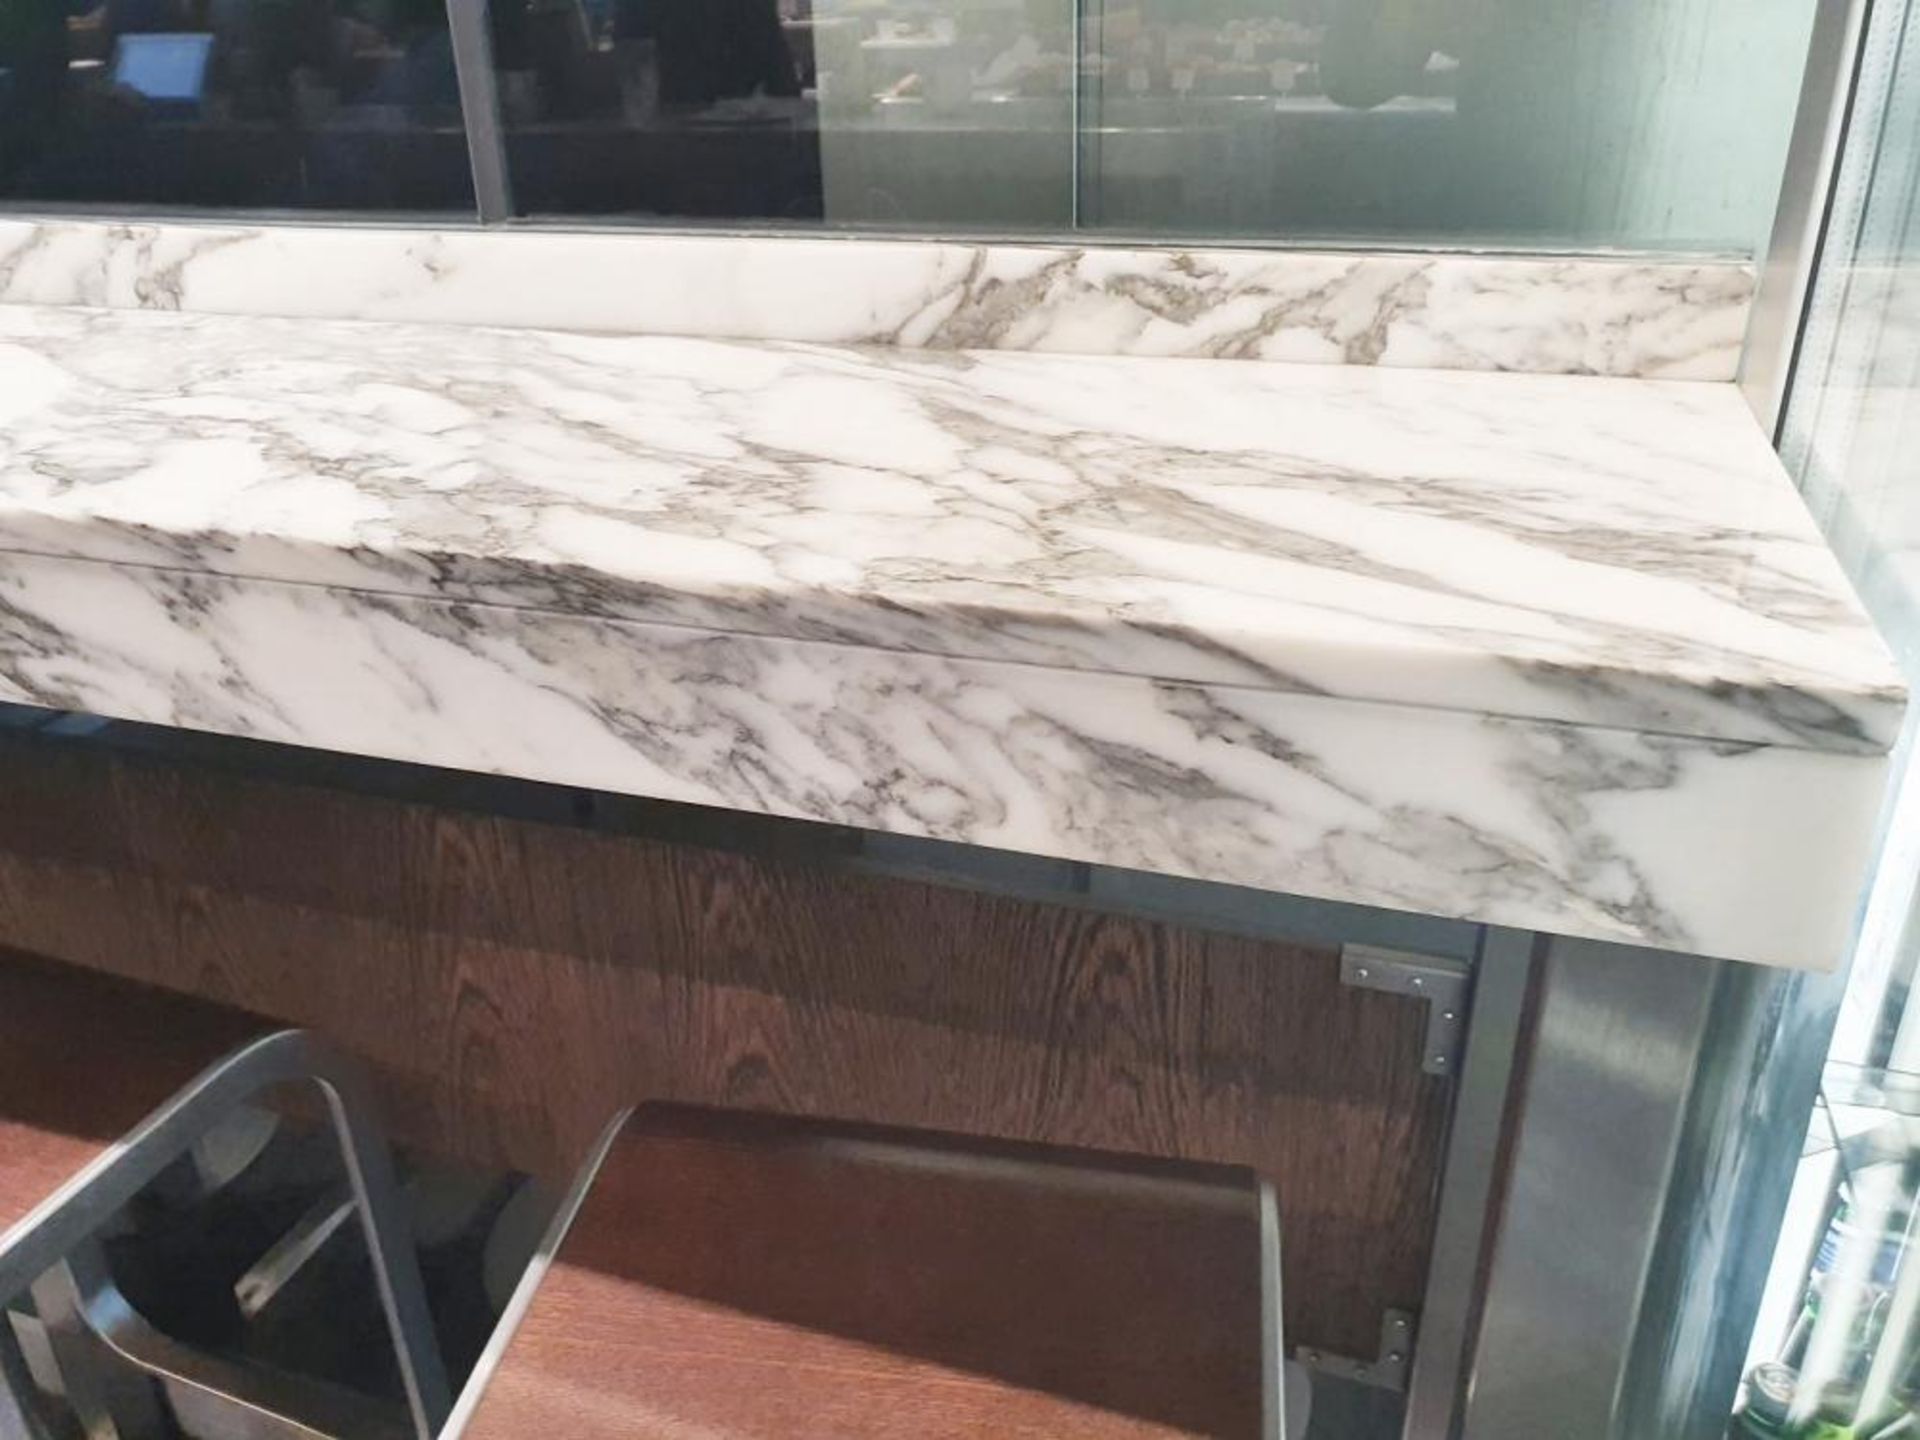 1 x White Marble/Granite Breakfast / Coffee Bar - Two Piece - From A Milan-style City Centre Cafe - Image 3 of 5